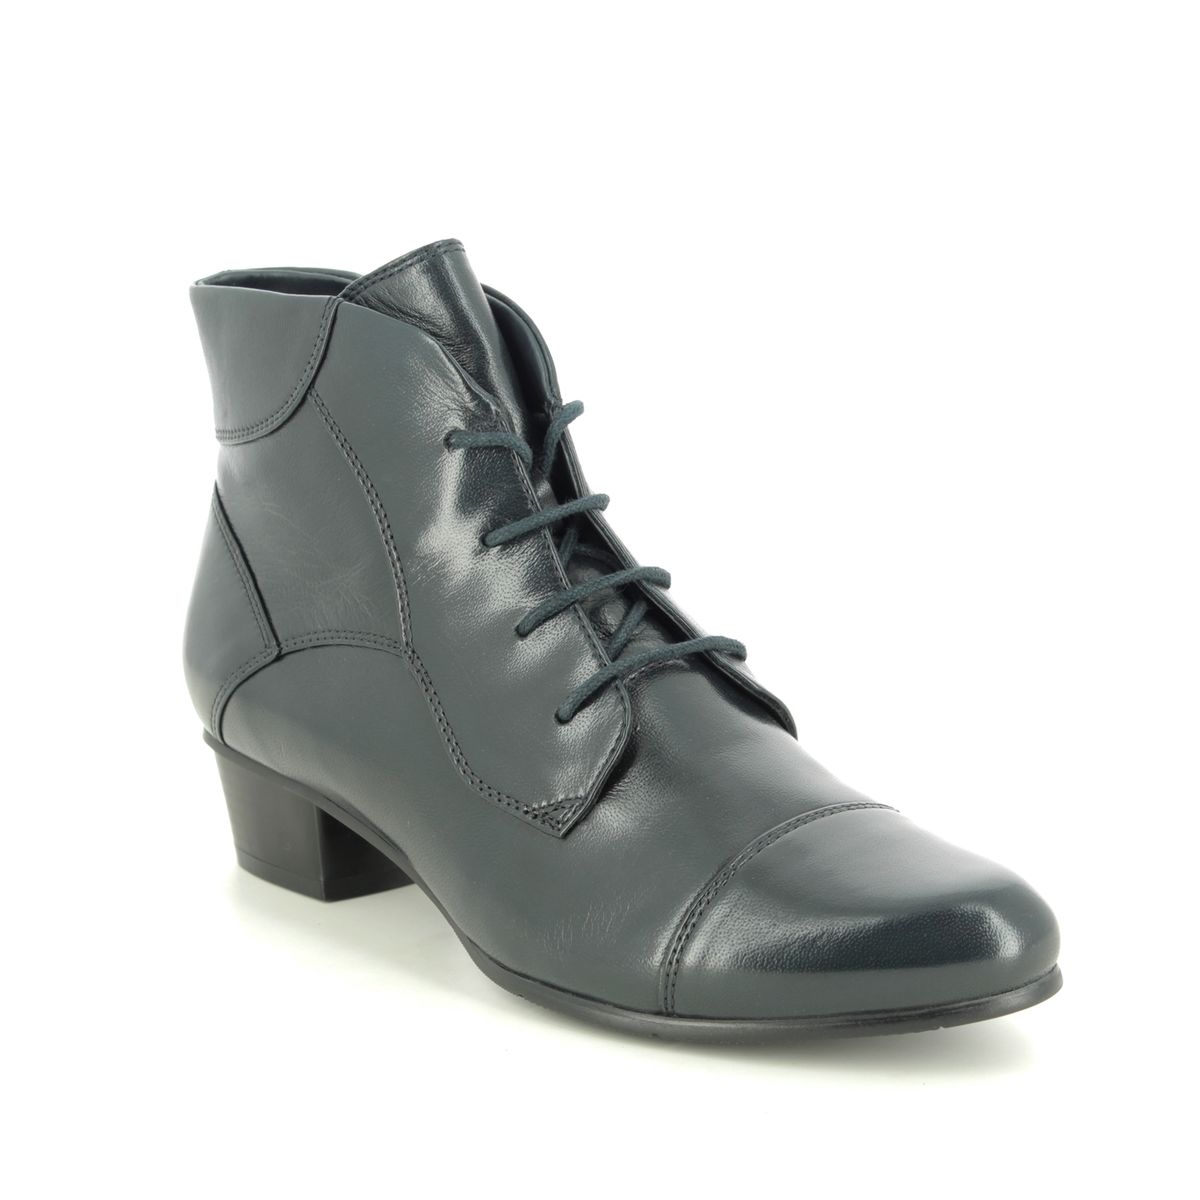 Regarde le Ciel Stefany 123 Lace Navy leather Womens Lace Up Boots 0123-150 in a Plain Leather in Size 39